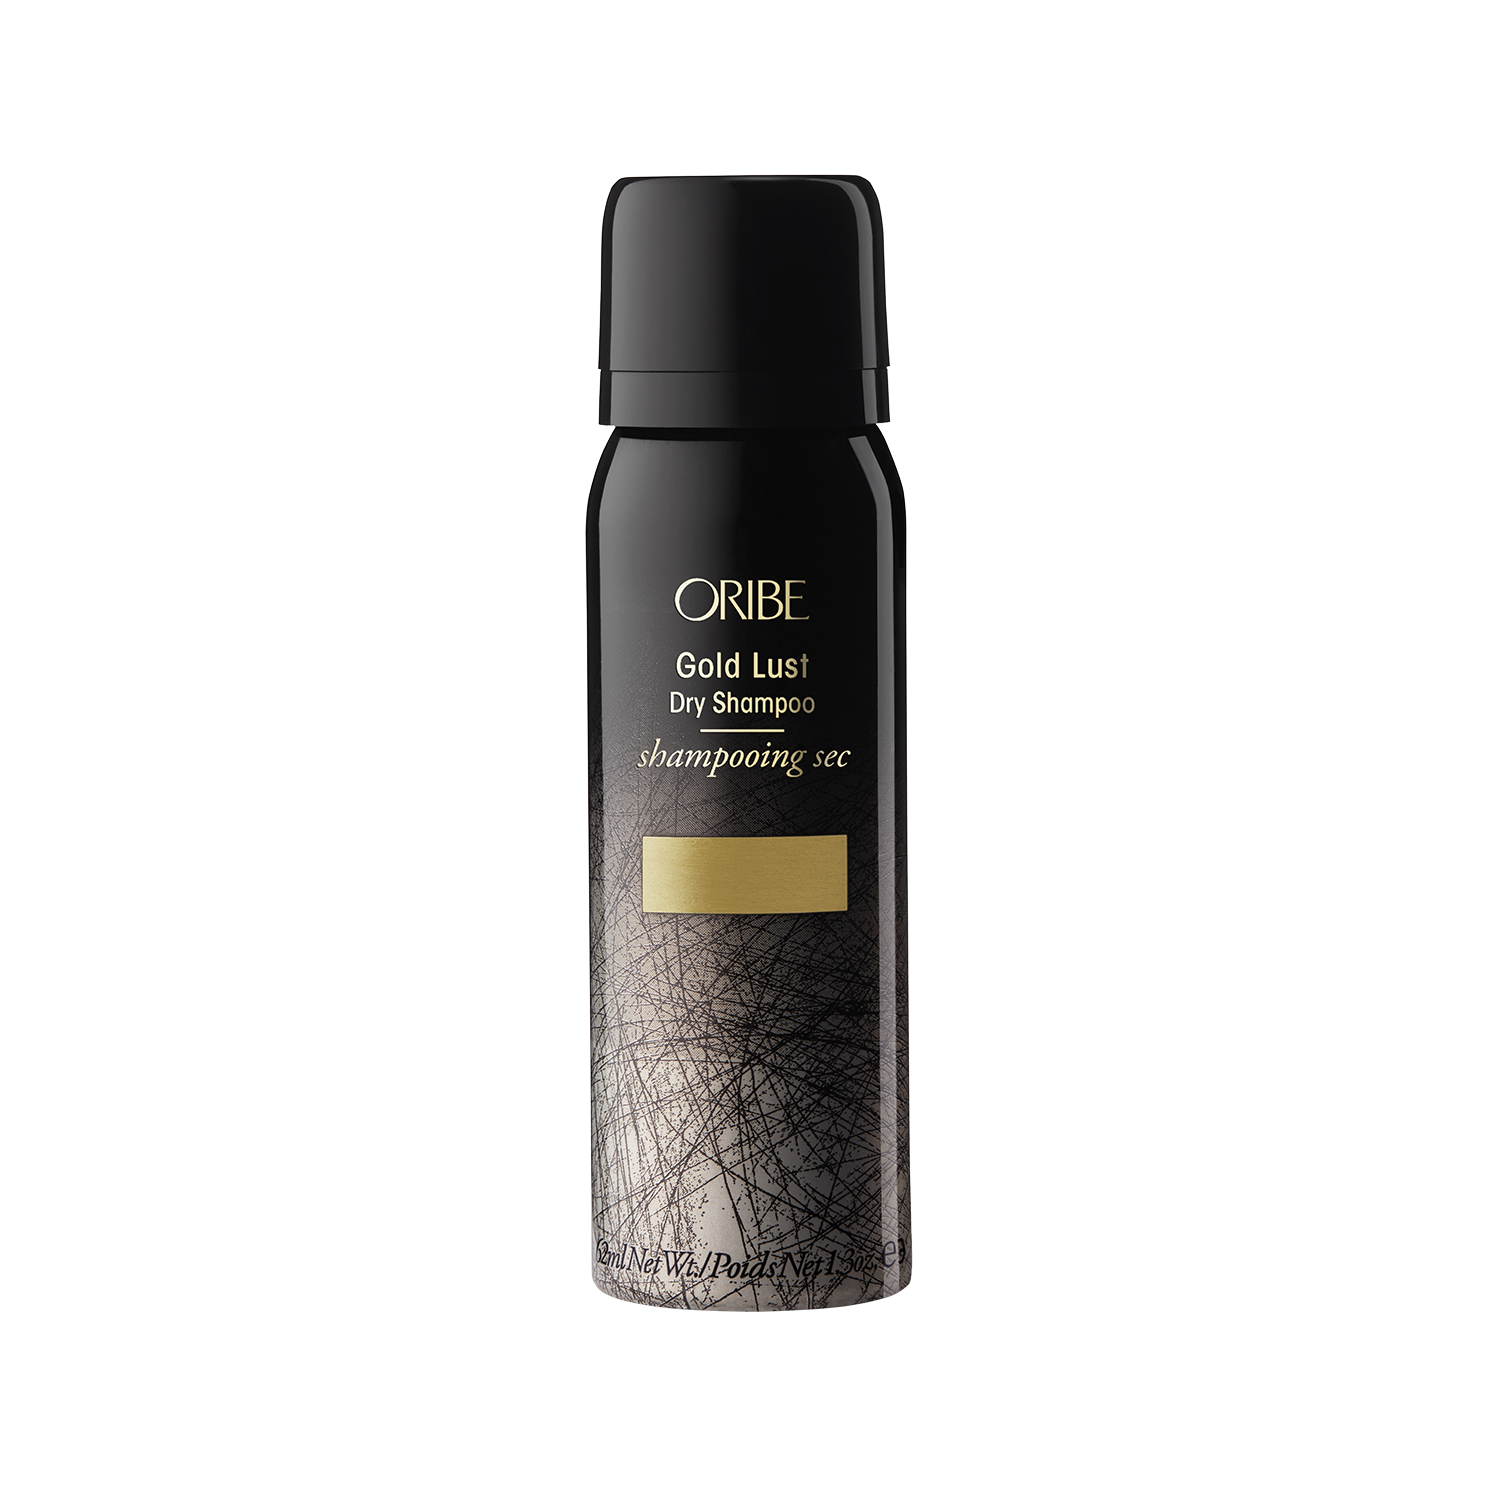 ORIBE - shampooing sec Gold Lust (Format voyage)